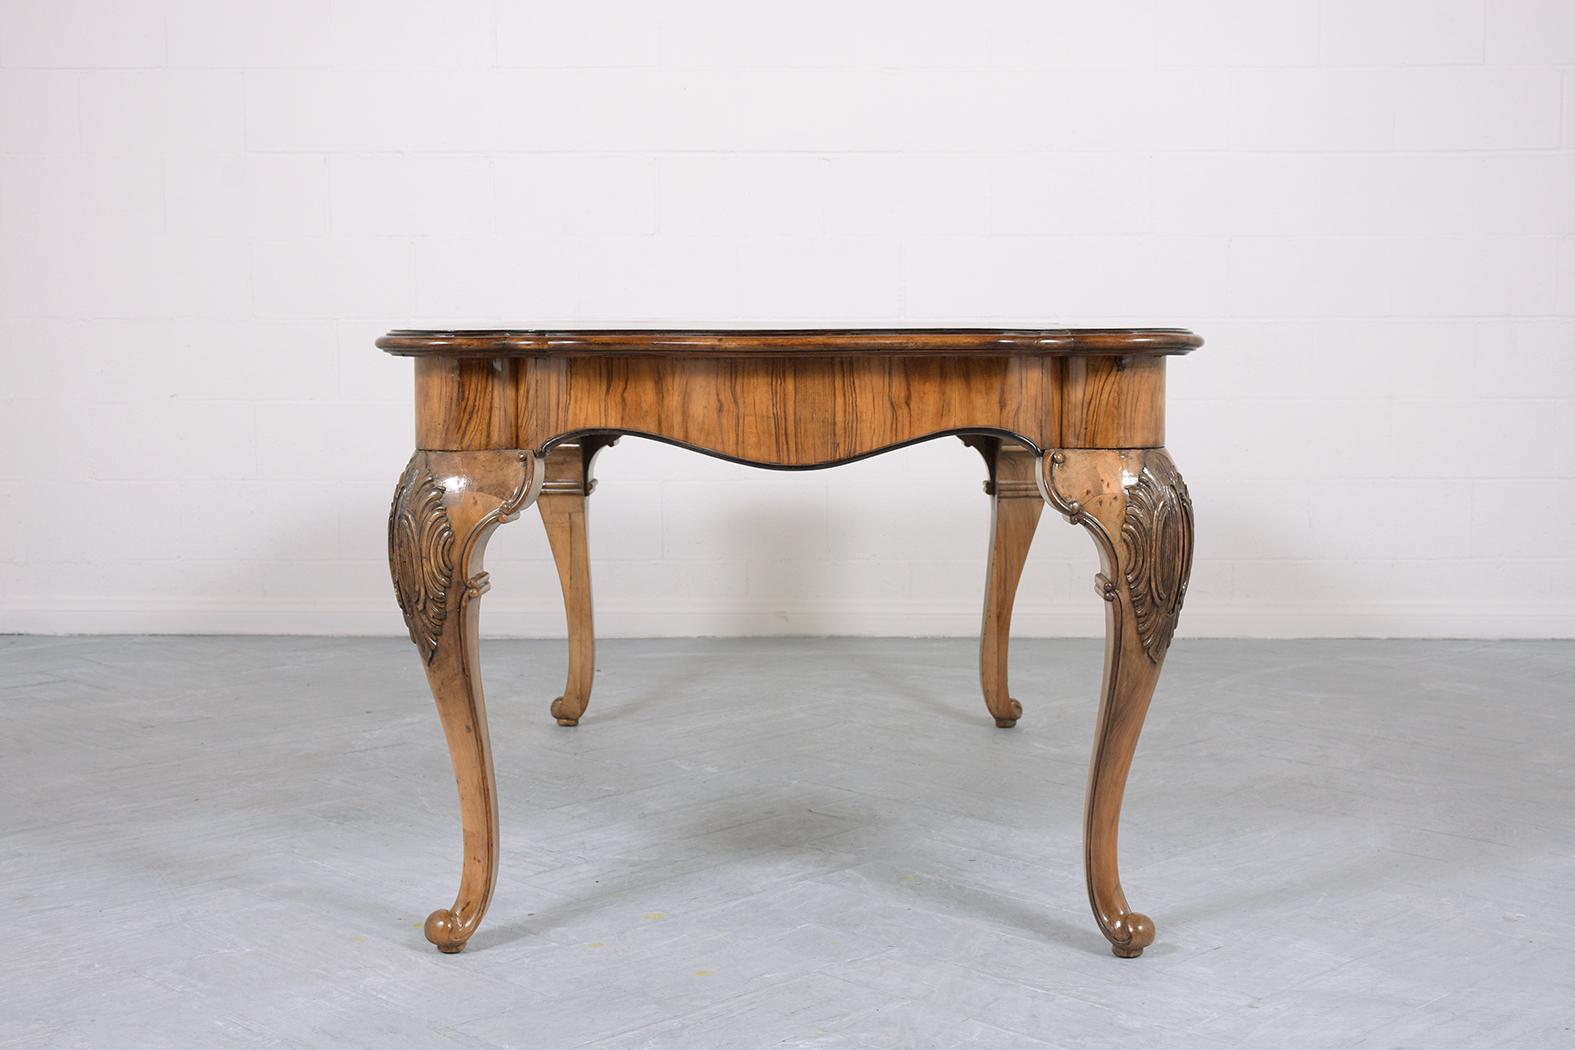 Late 19th-Century English Walnut Dining Table with Carved Cabriole Legs 3